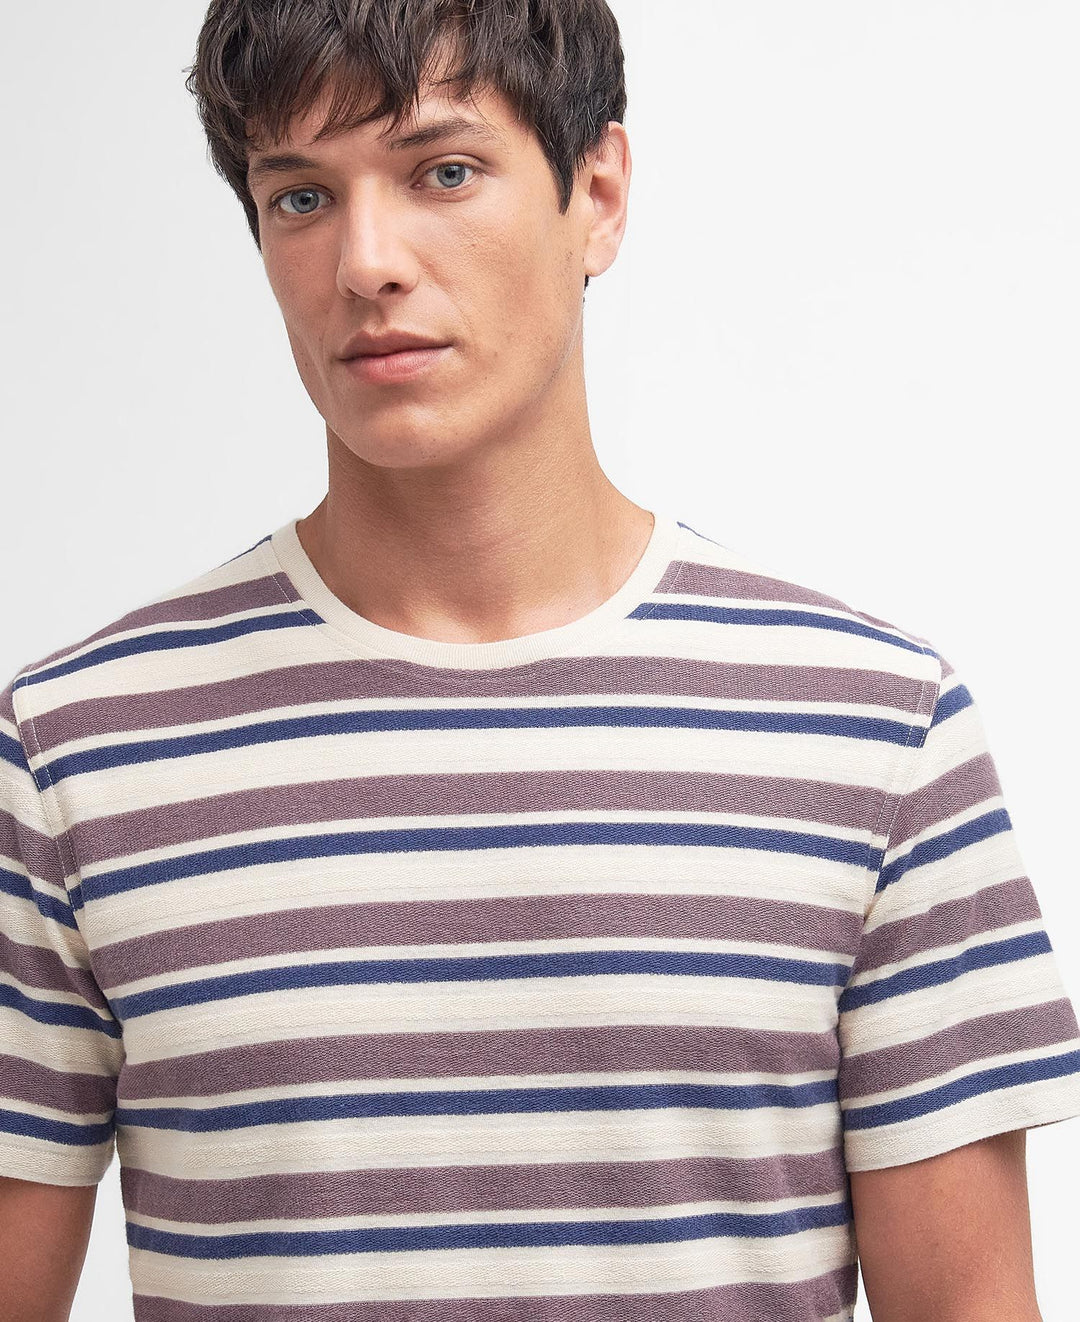 Barbour Whitwell Striped T-Shirt/Majica